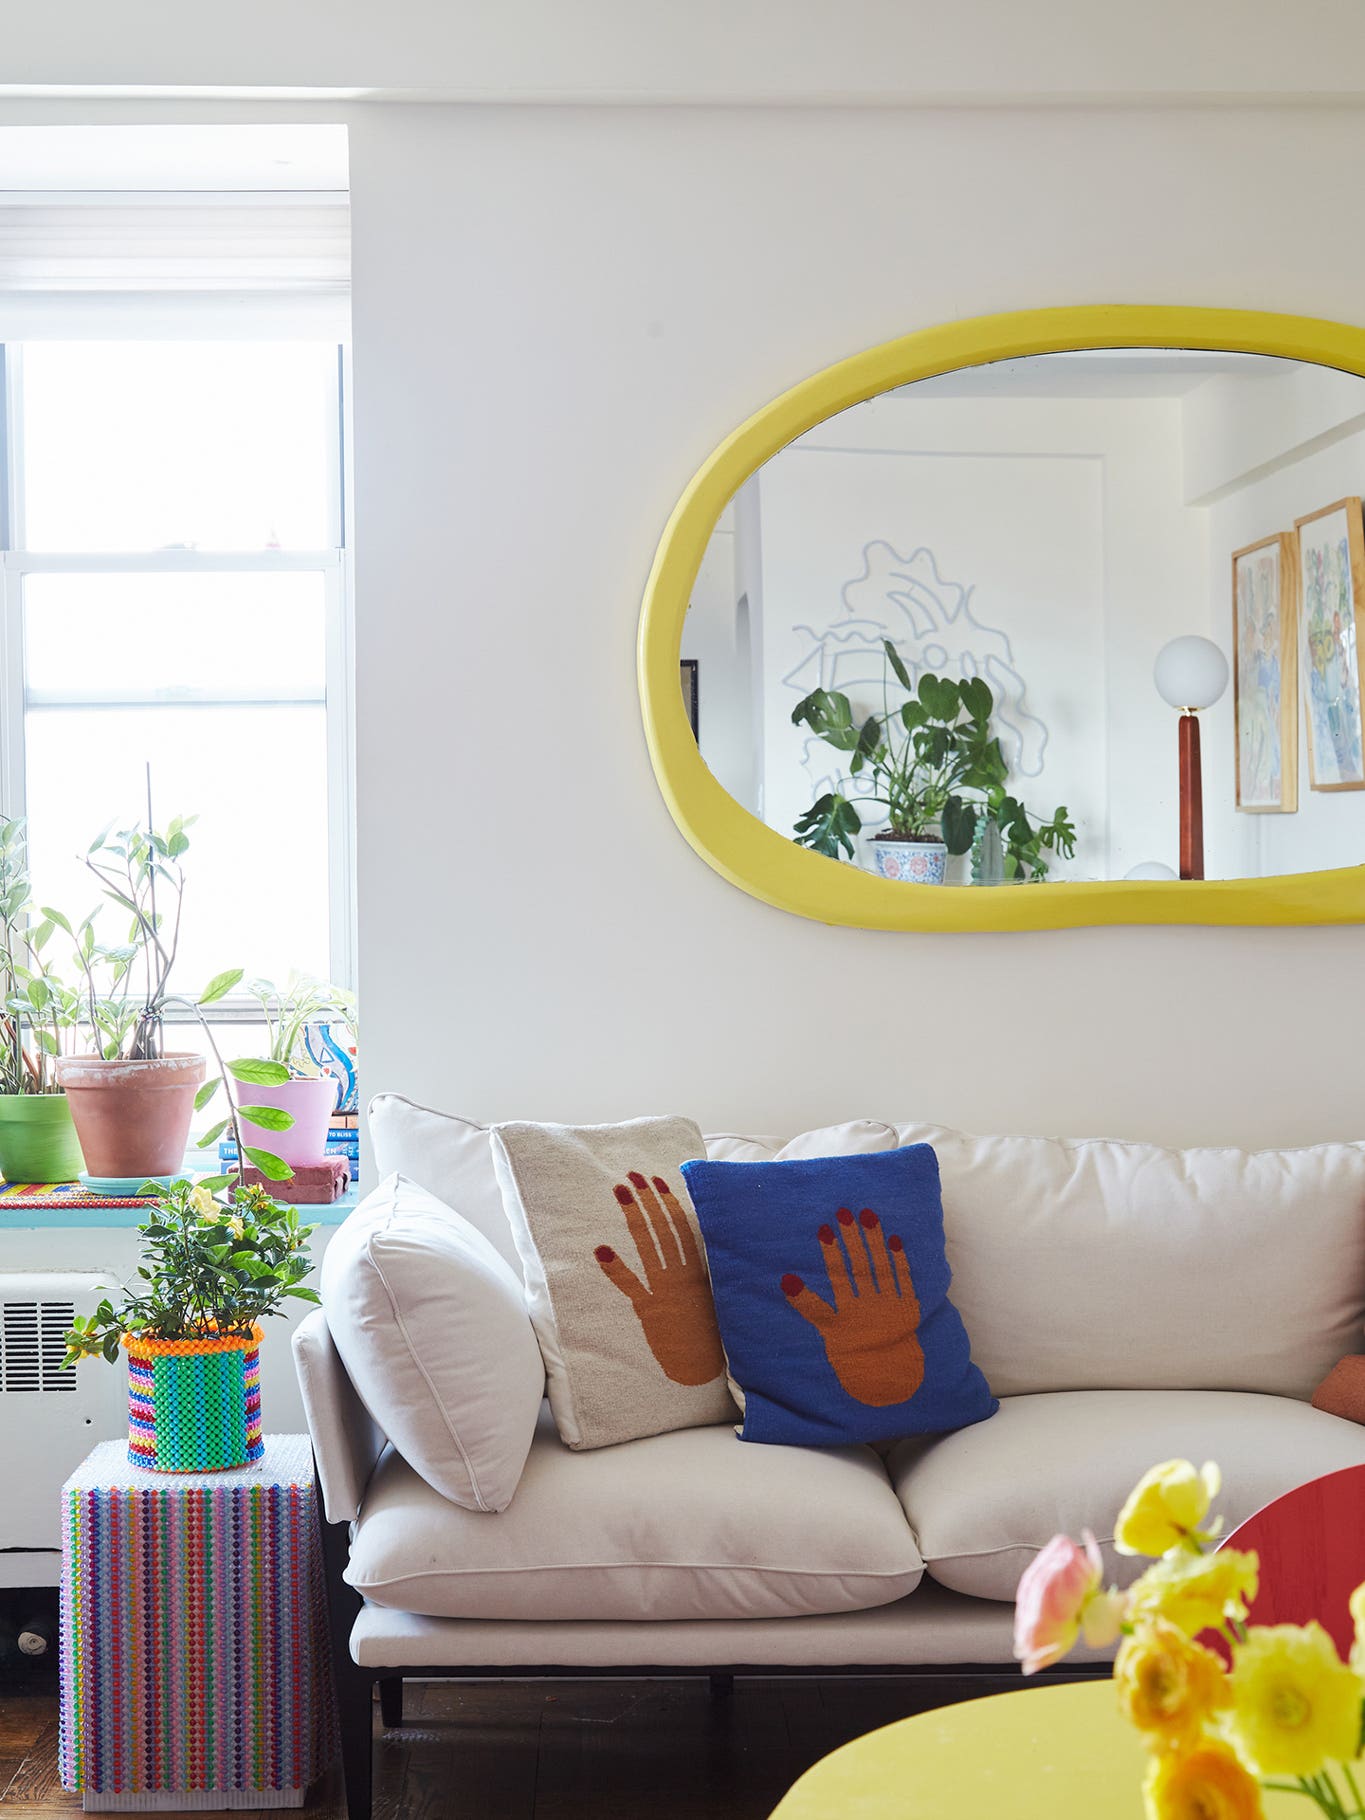 Of Course, the Most Popular Decor DIY Right Now Involves IKEA